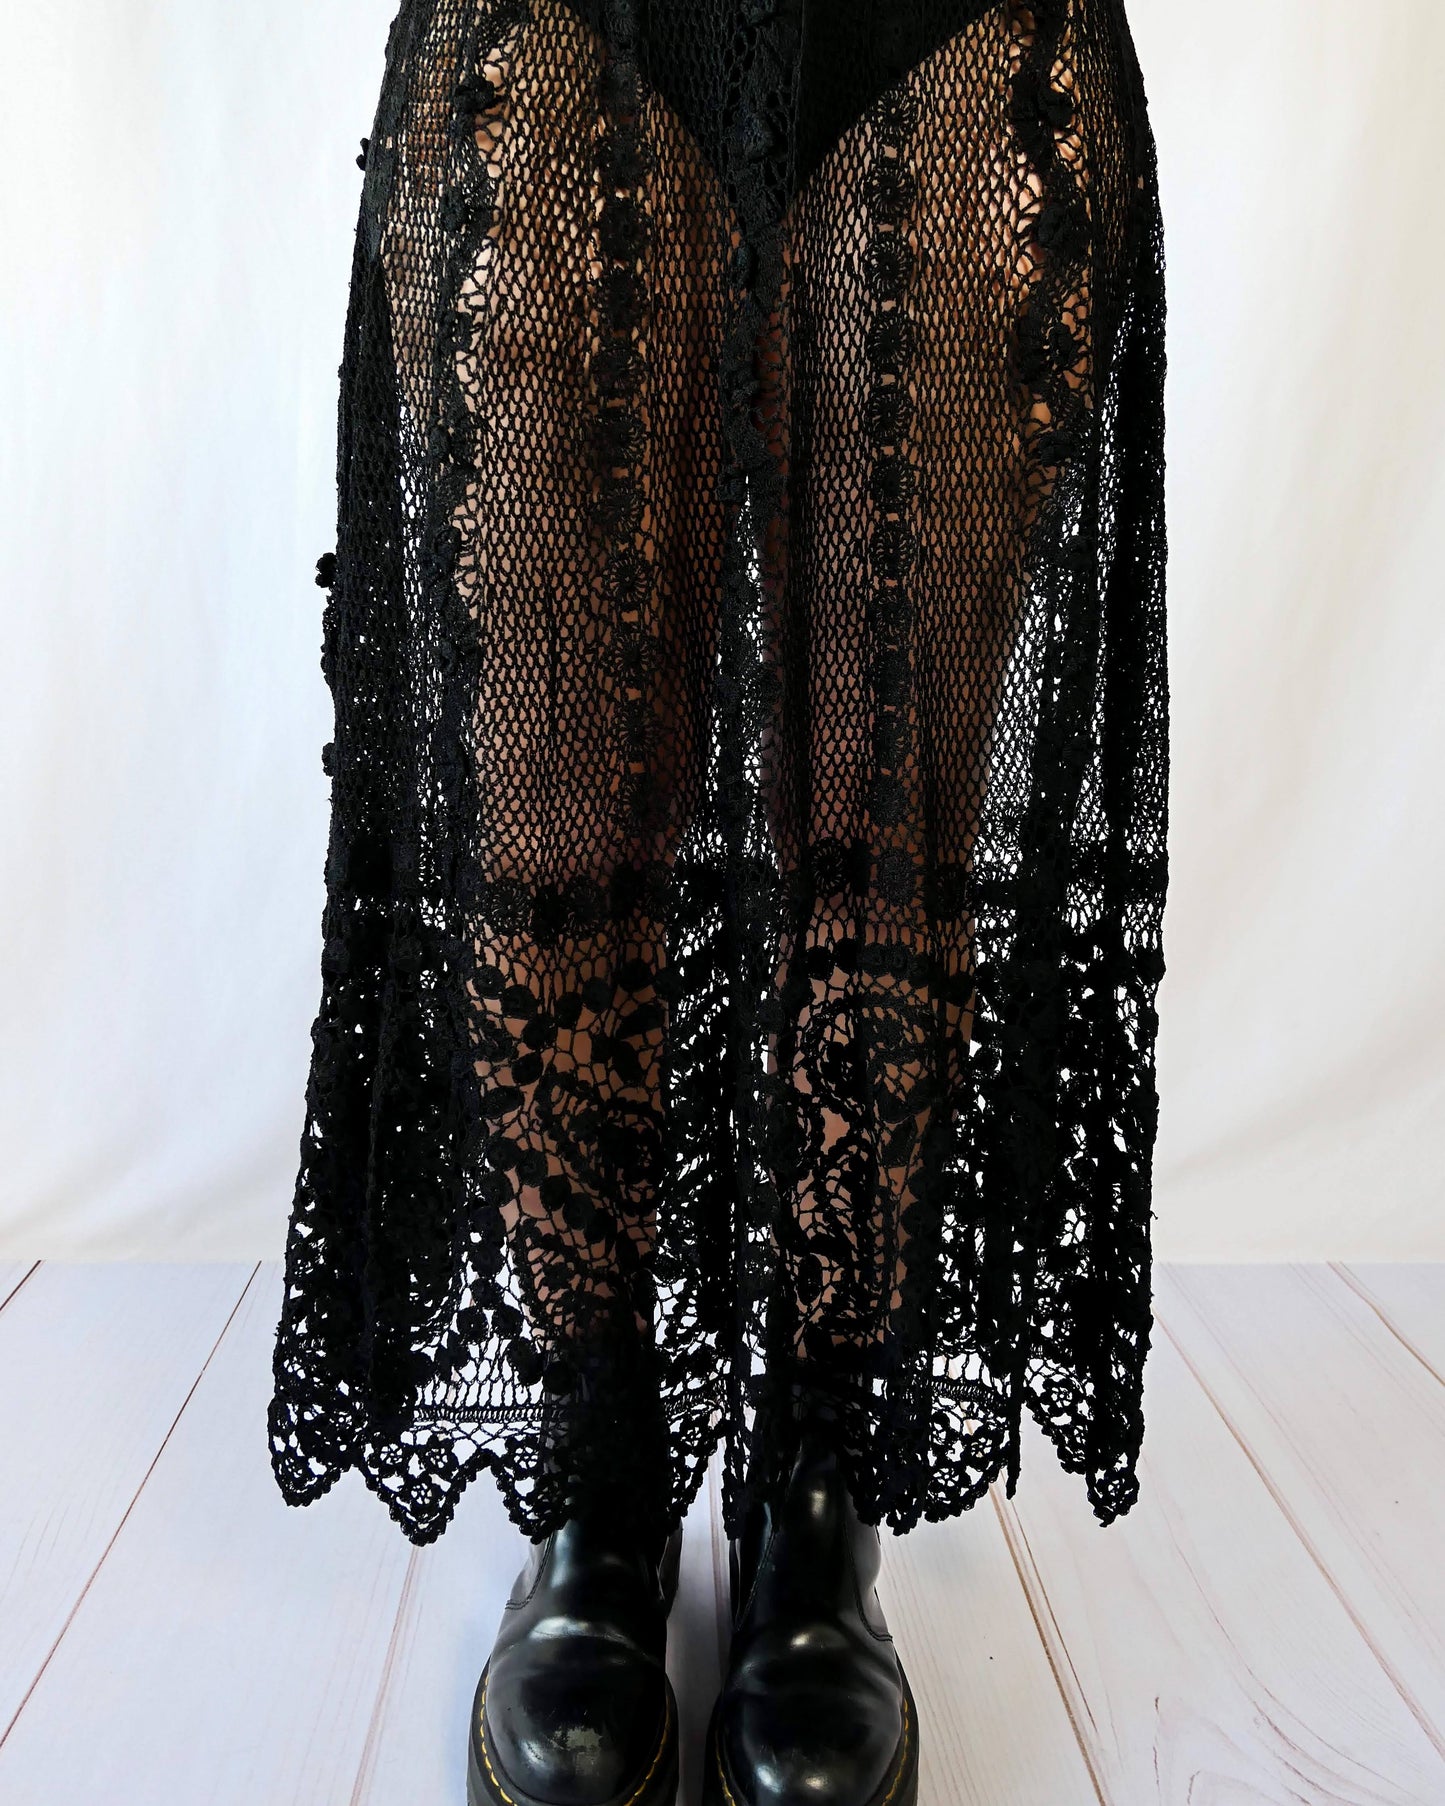 Fall in love again with this original Lim's bohemian, whimsical black hand crocheted, maxi length skirt. Lovely paisley motif at the bottom hem, with vertical lines throughout the dress composed of intricate pinwheel-like circles and squiggly lines dotted with flowers. Looks stunning paired with a black silk camisole and bikini shorts, or a black sweater or crop top and a pair of boots.  Size: Fits Small to Medium﻿  Measurements:  Waist 26"- 30" Length 38" Hip 55” Color: Black  Material: 100% cotton